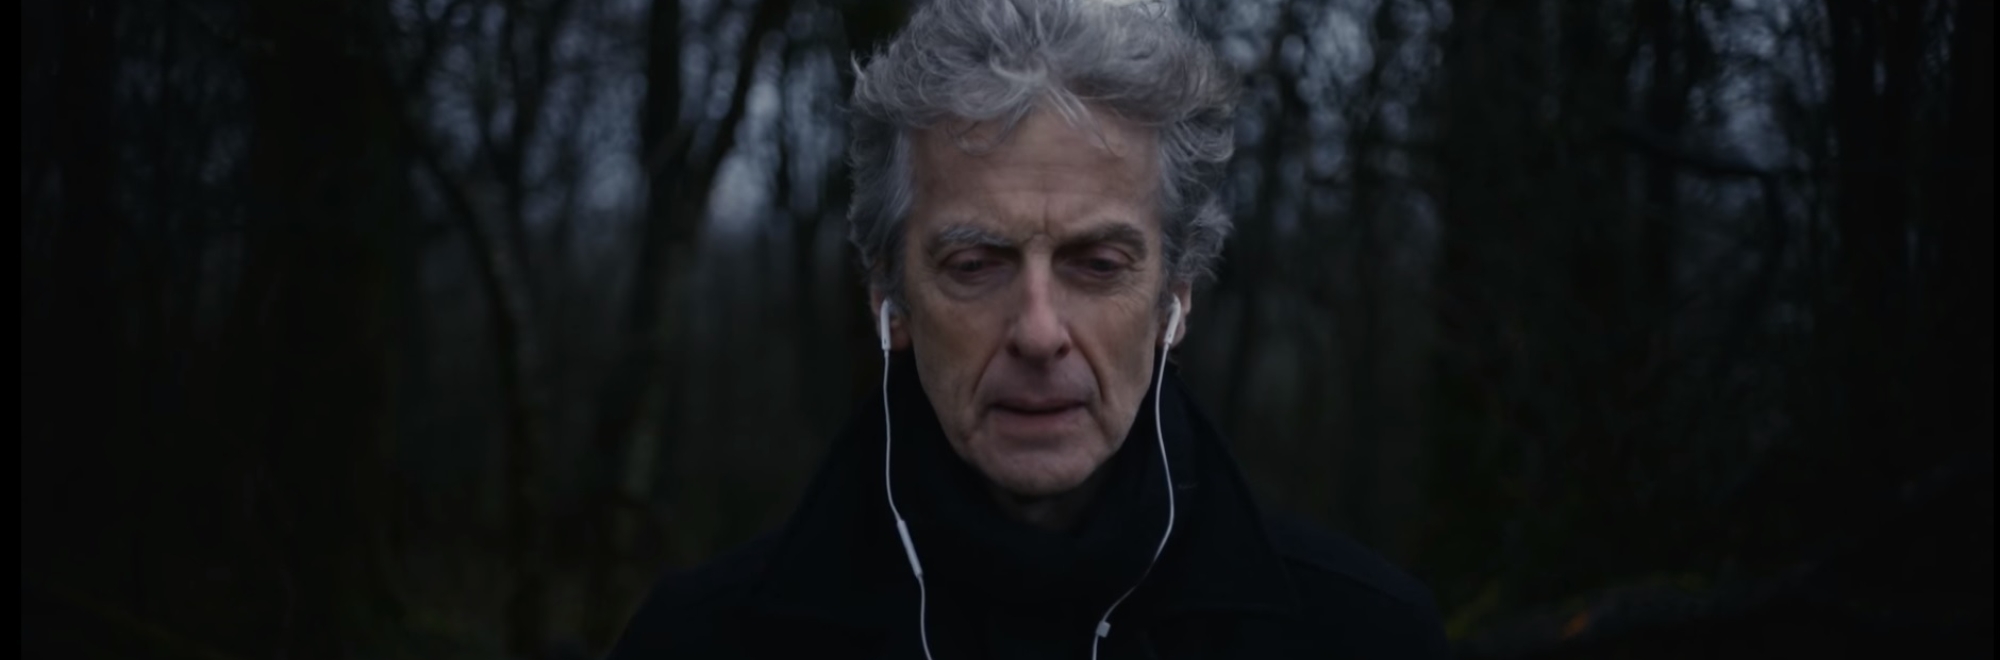 Why this powerful Lewis Capaldi music video starring Peter Capaldi is a hit for organ-donation charities